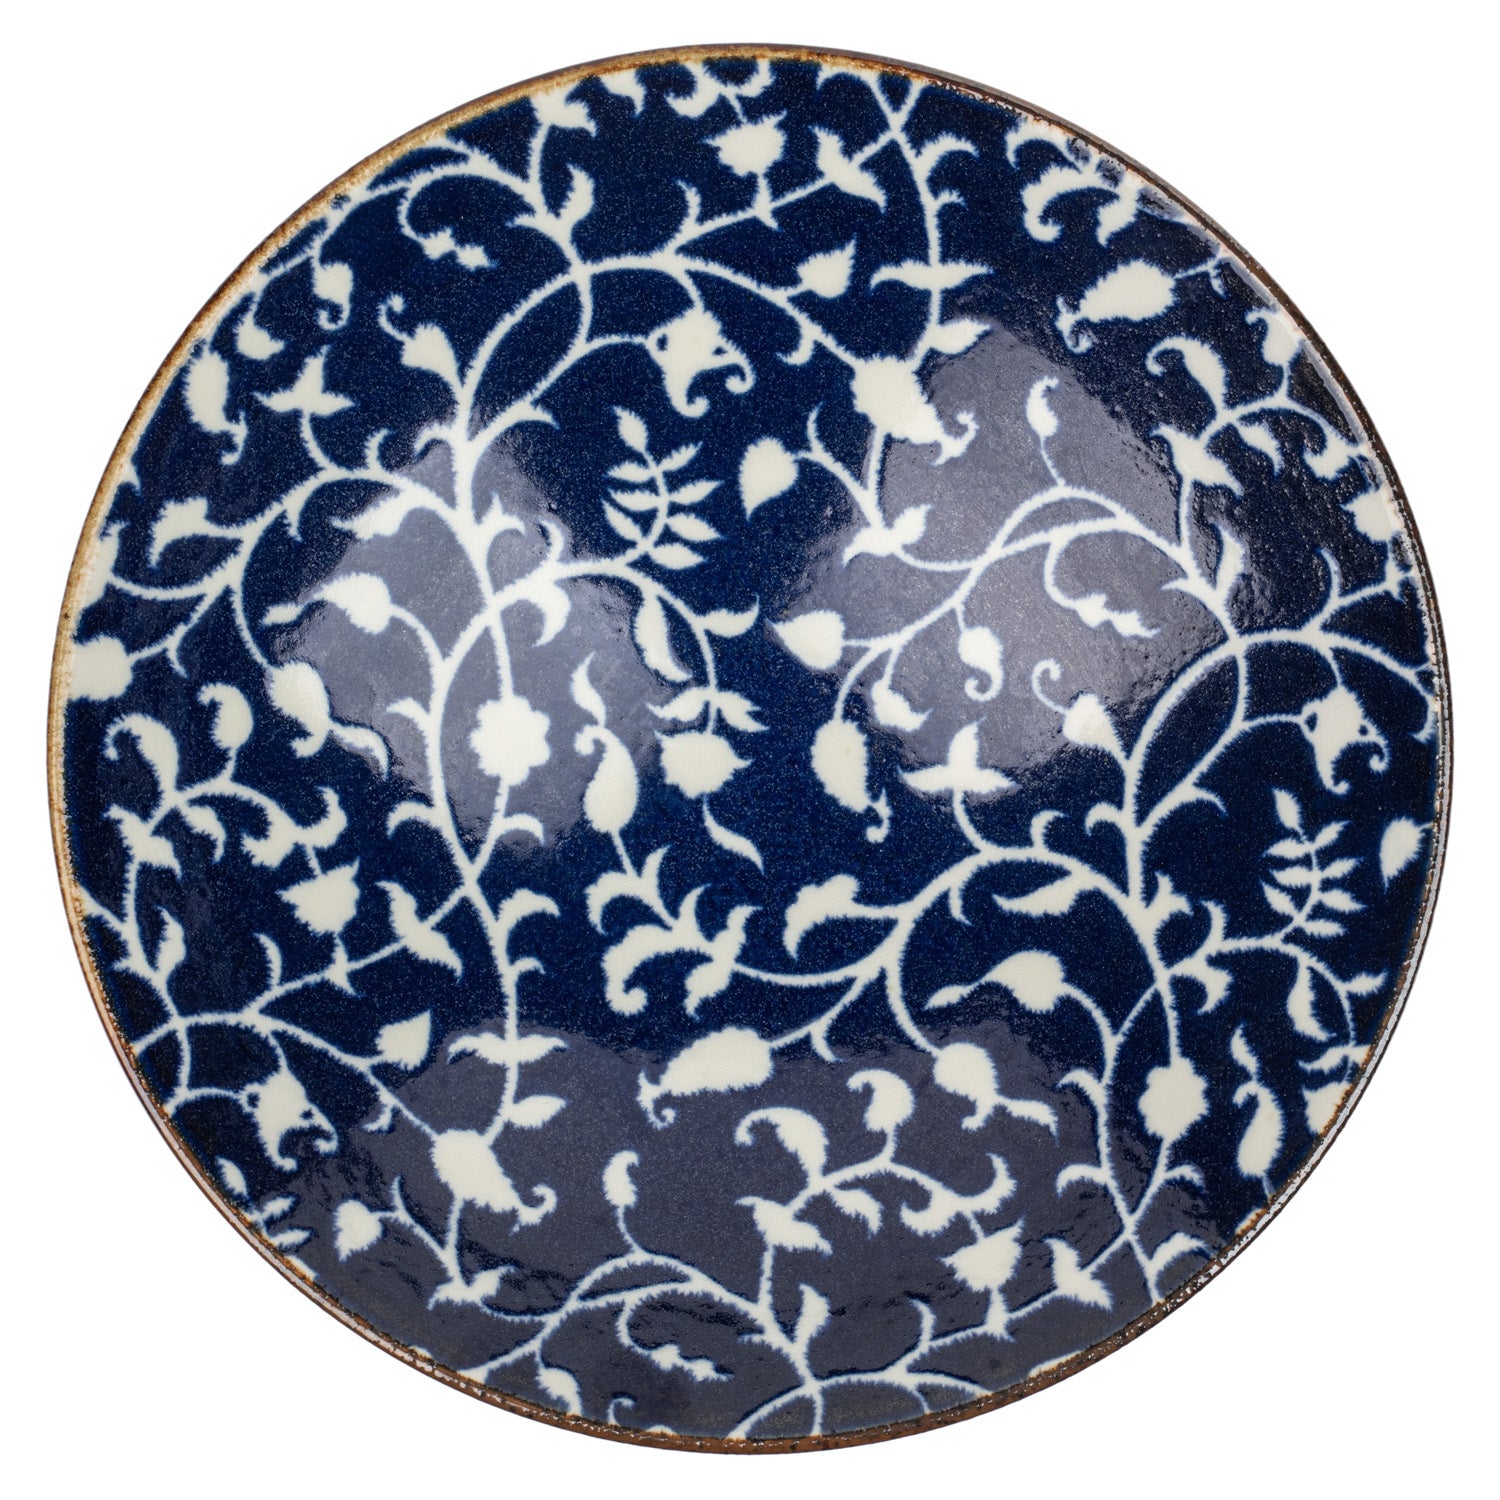 Indigo Blue and White Floral Large Japanese Serving Bowl top